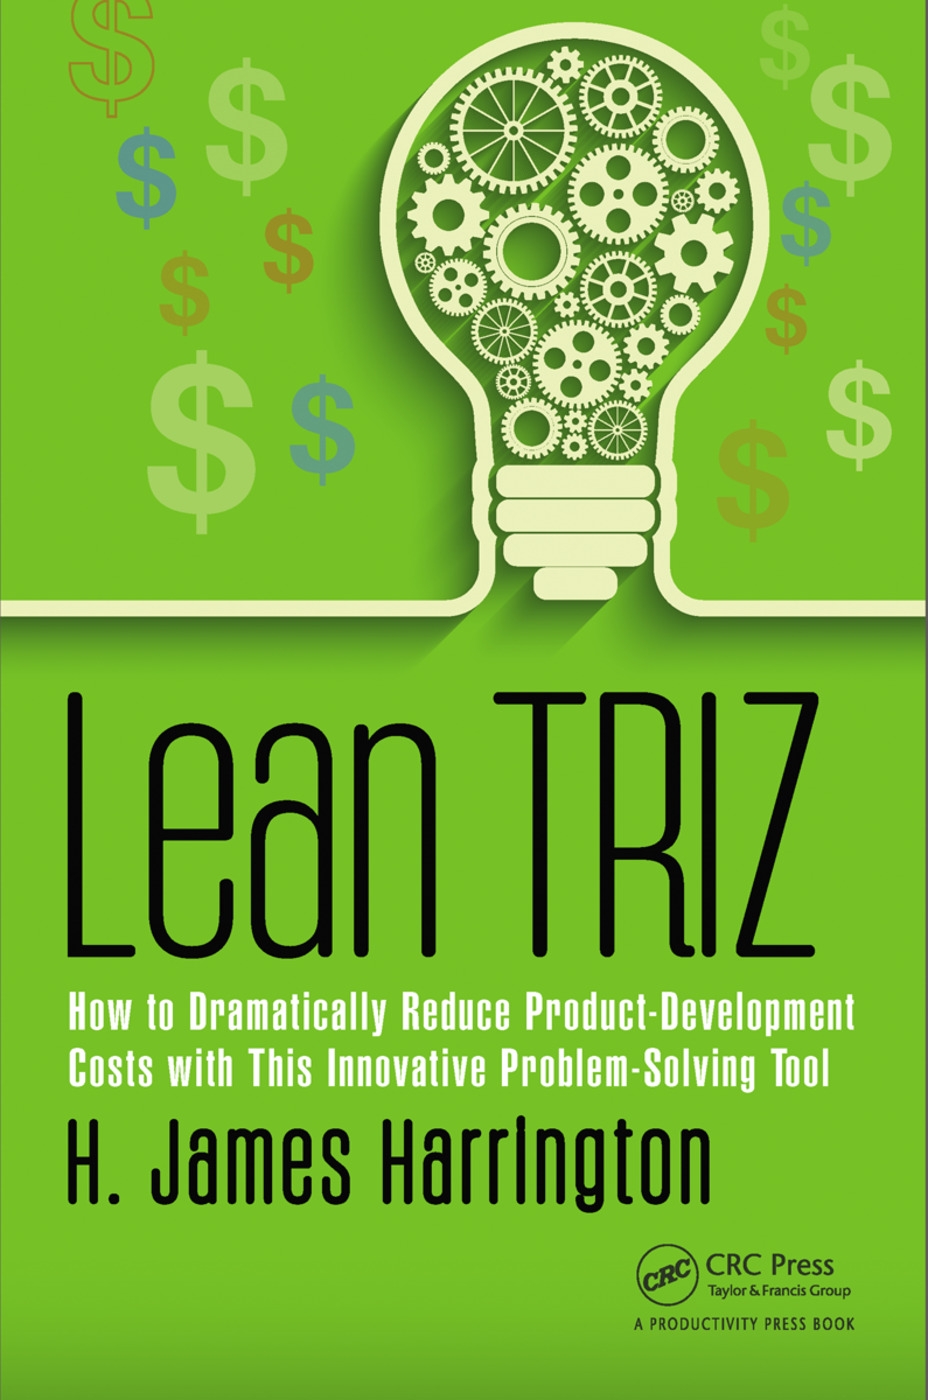 Lean Triz: How to Dramatically Reduce Product-Development Costs with This Innovative Problem-Solving Tool